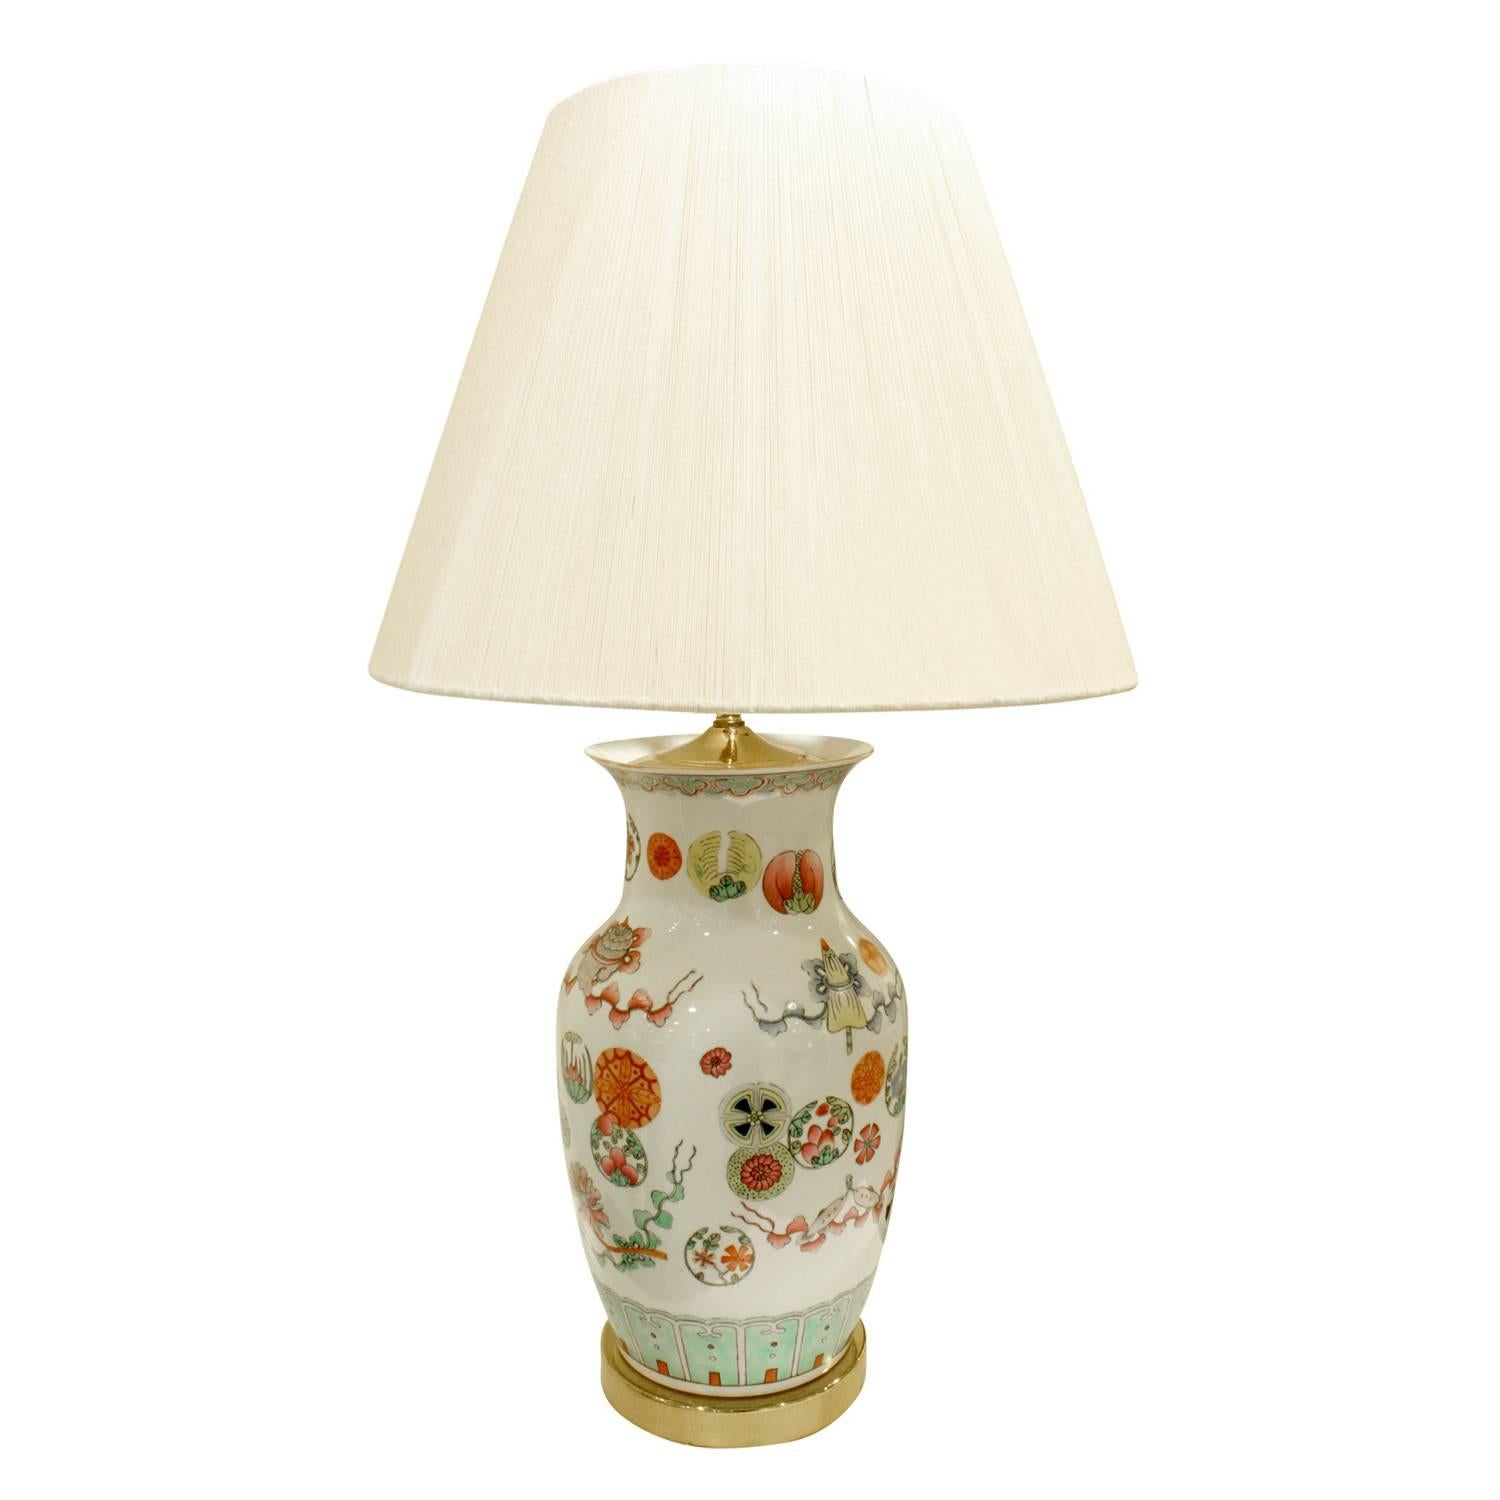 Exceptional hand-painted porcelain table lamp with flowers, medallions and geometric decoration with brass base and custom fittings, China, 1960s.